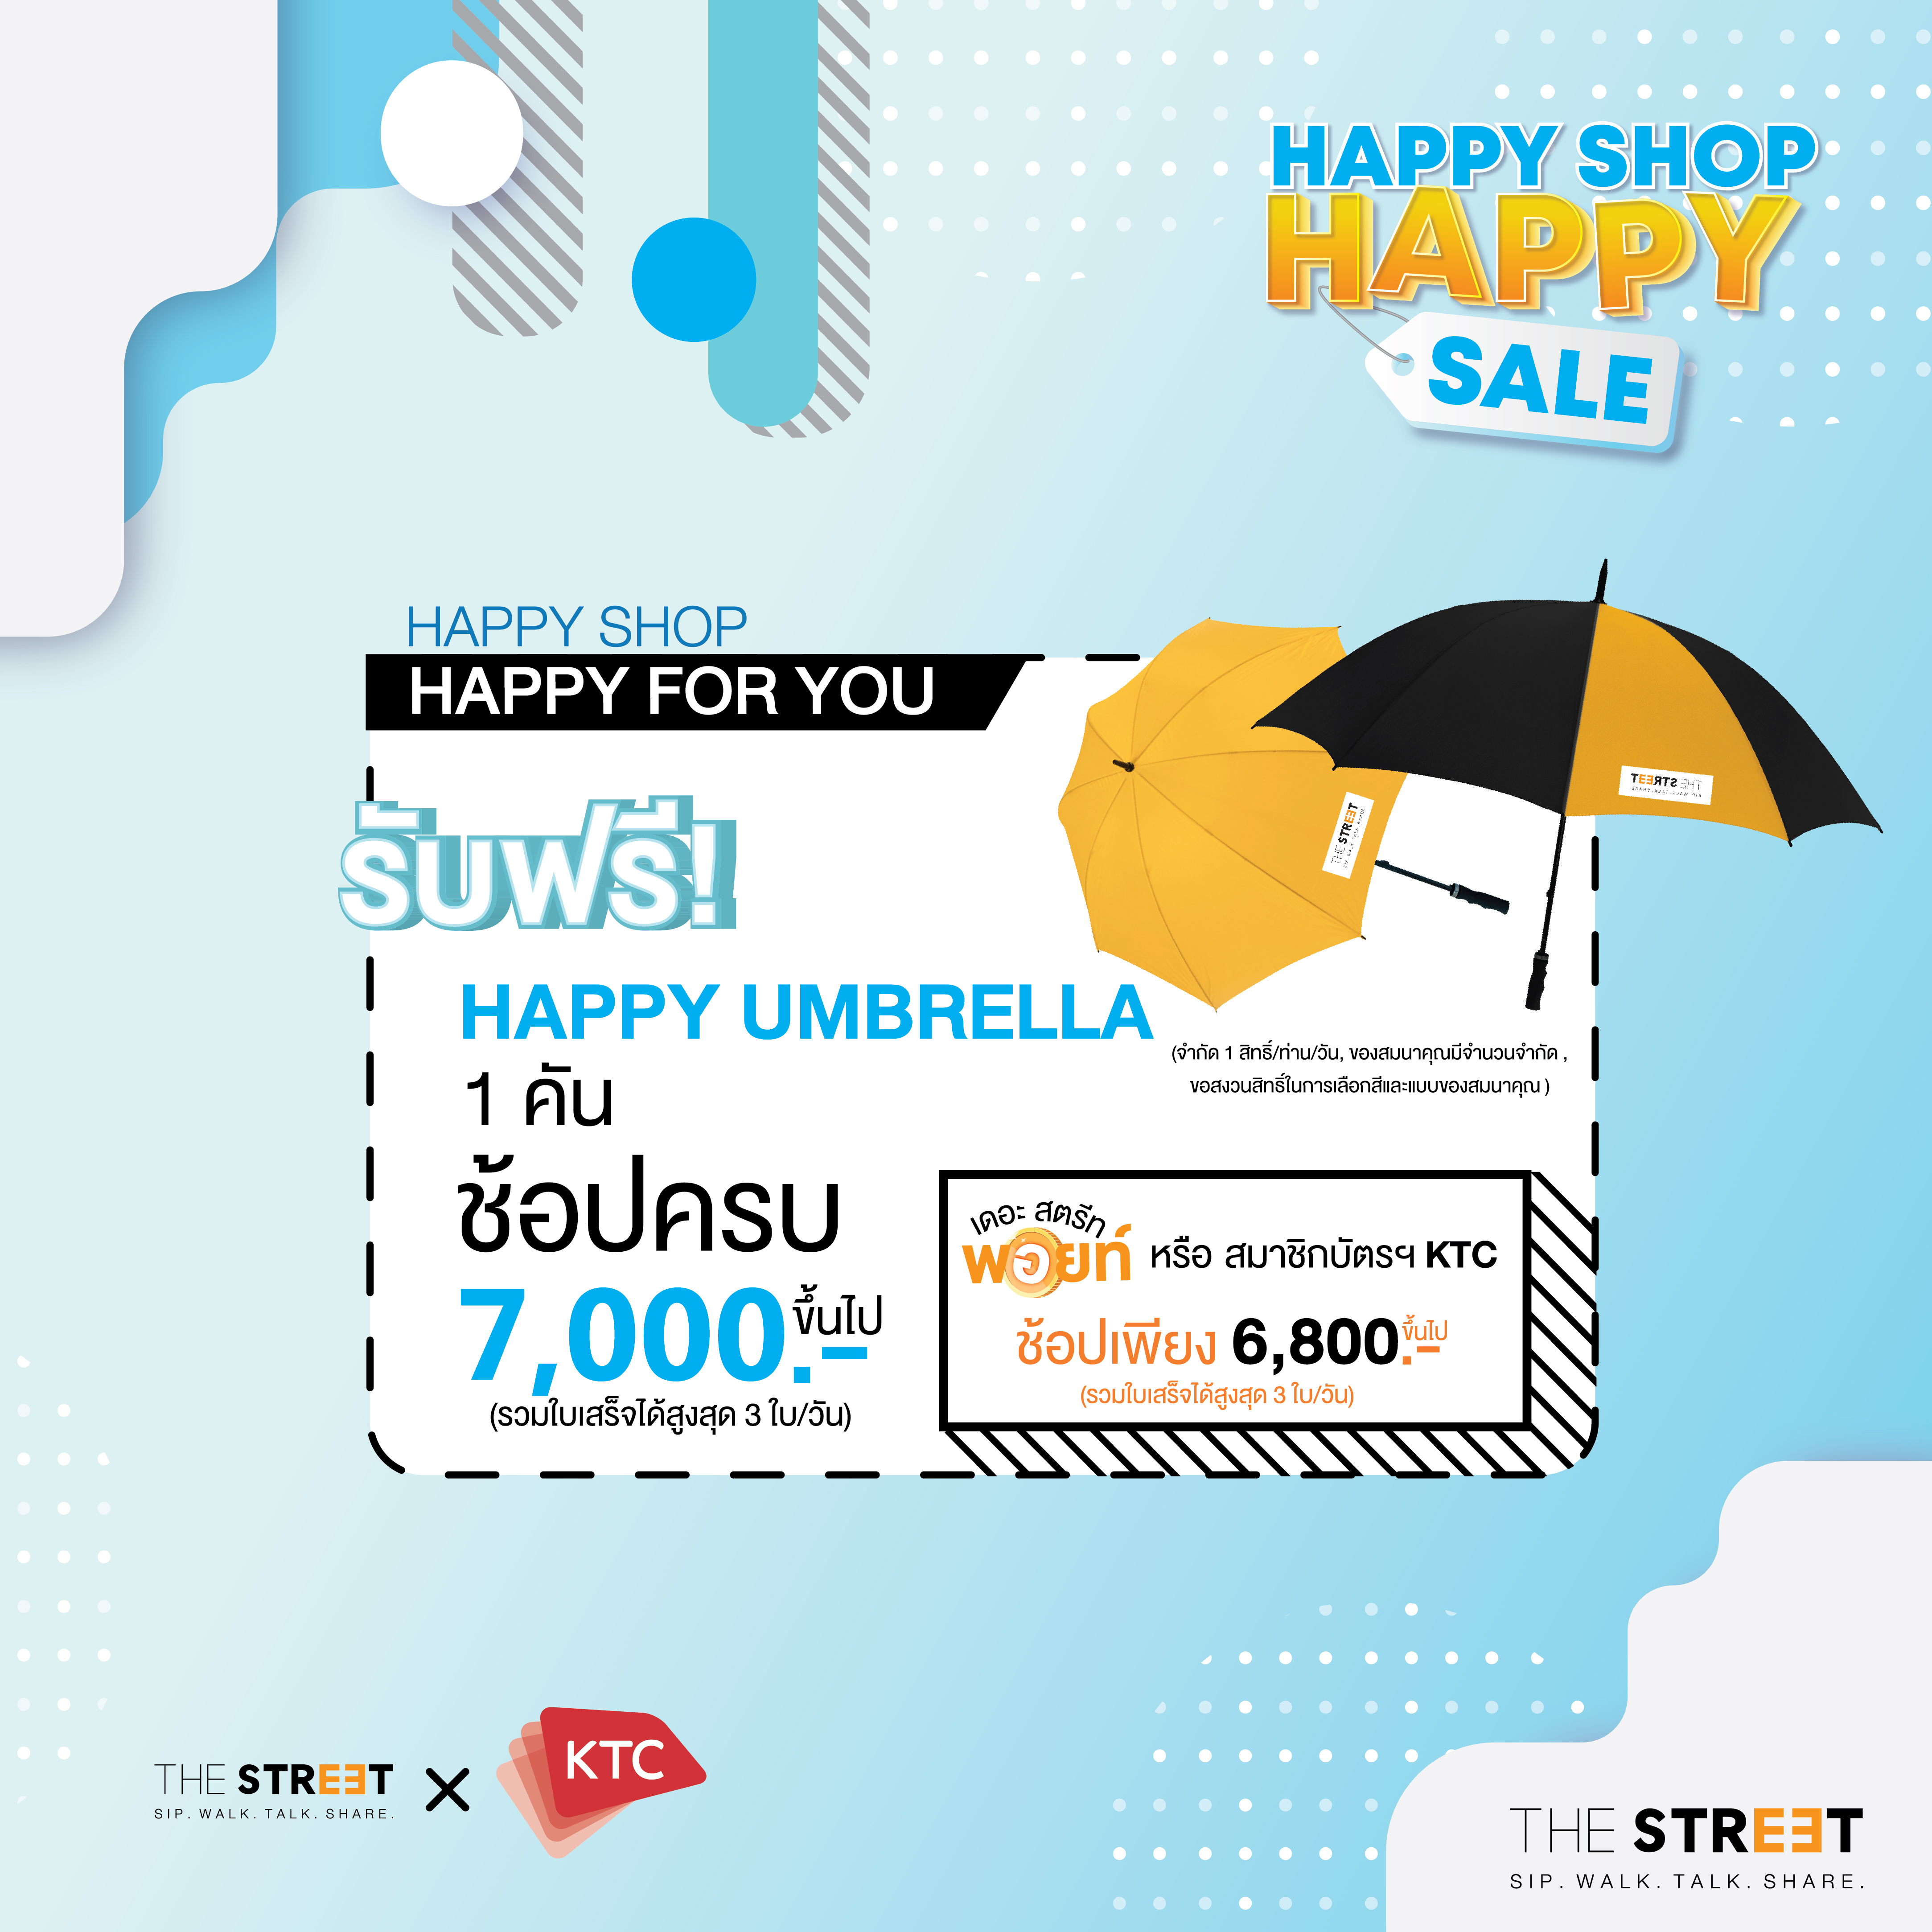 HAPPY SHOP HAPPY FOR YOU